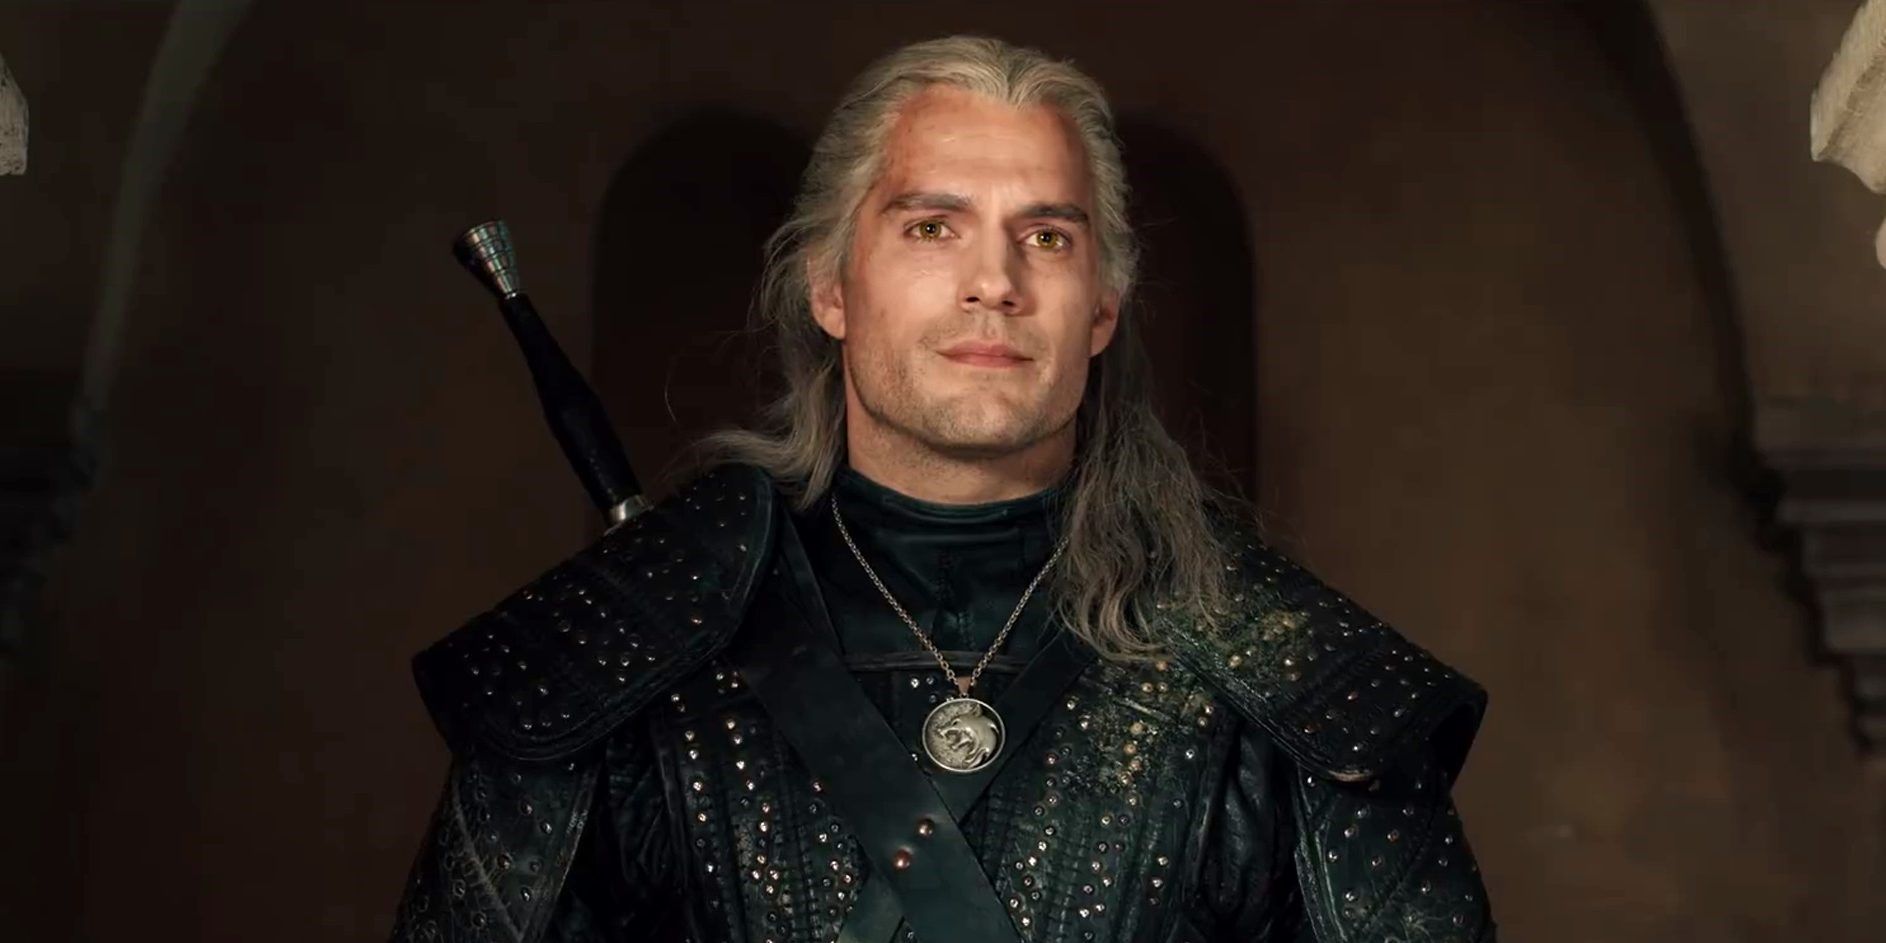 For Henry Cavill, Working On Netflix’s The Witcher Has Been ‘Great’